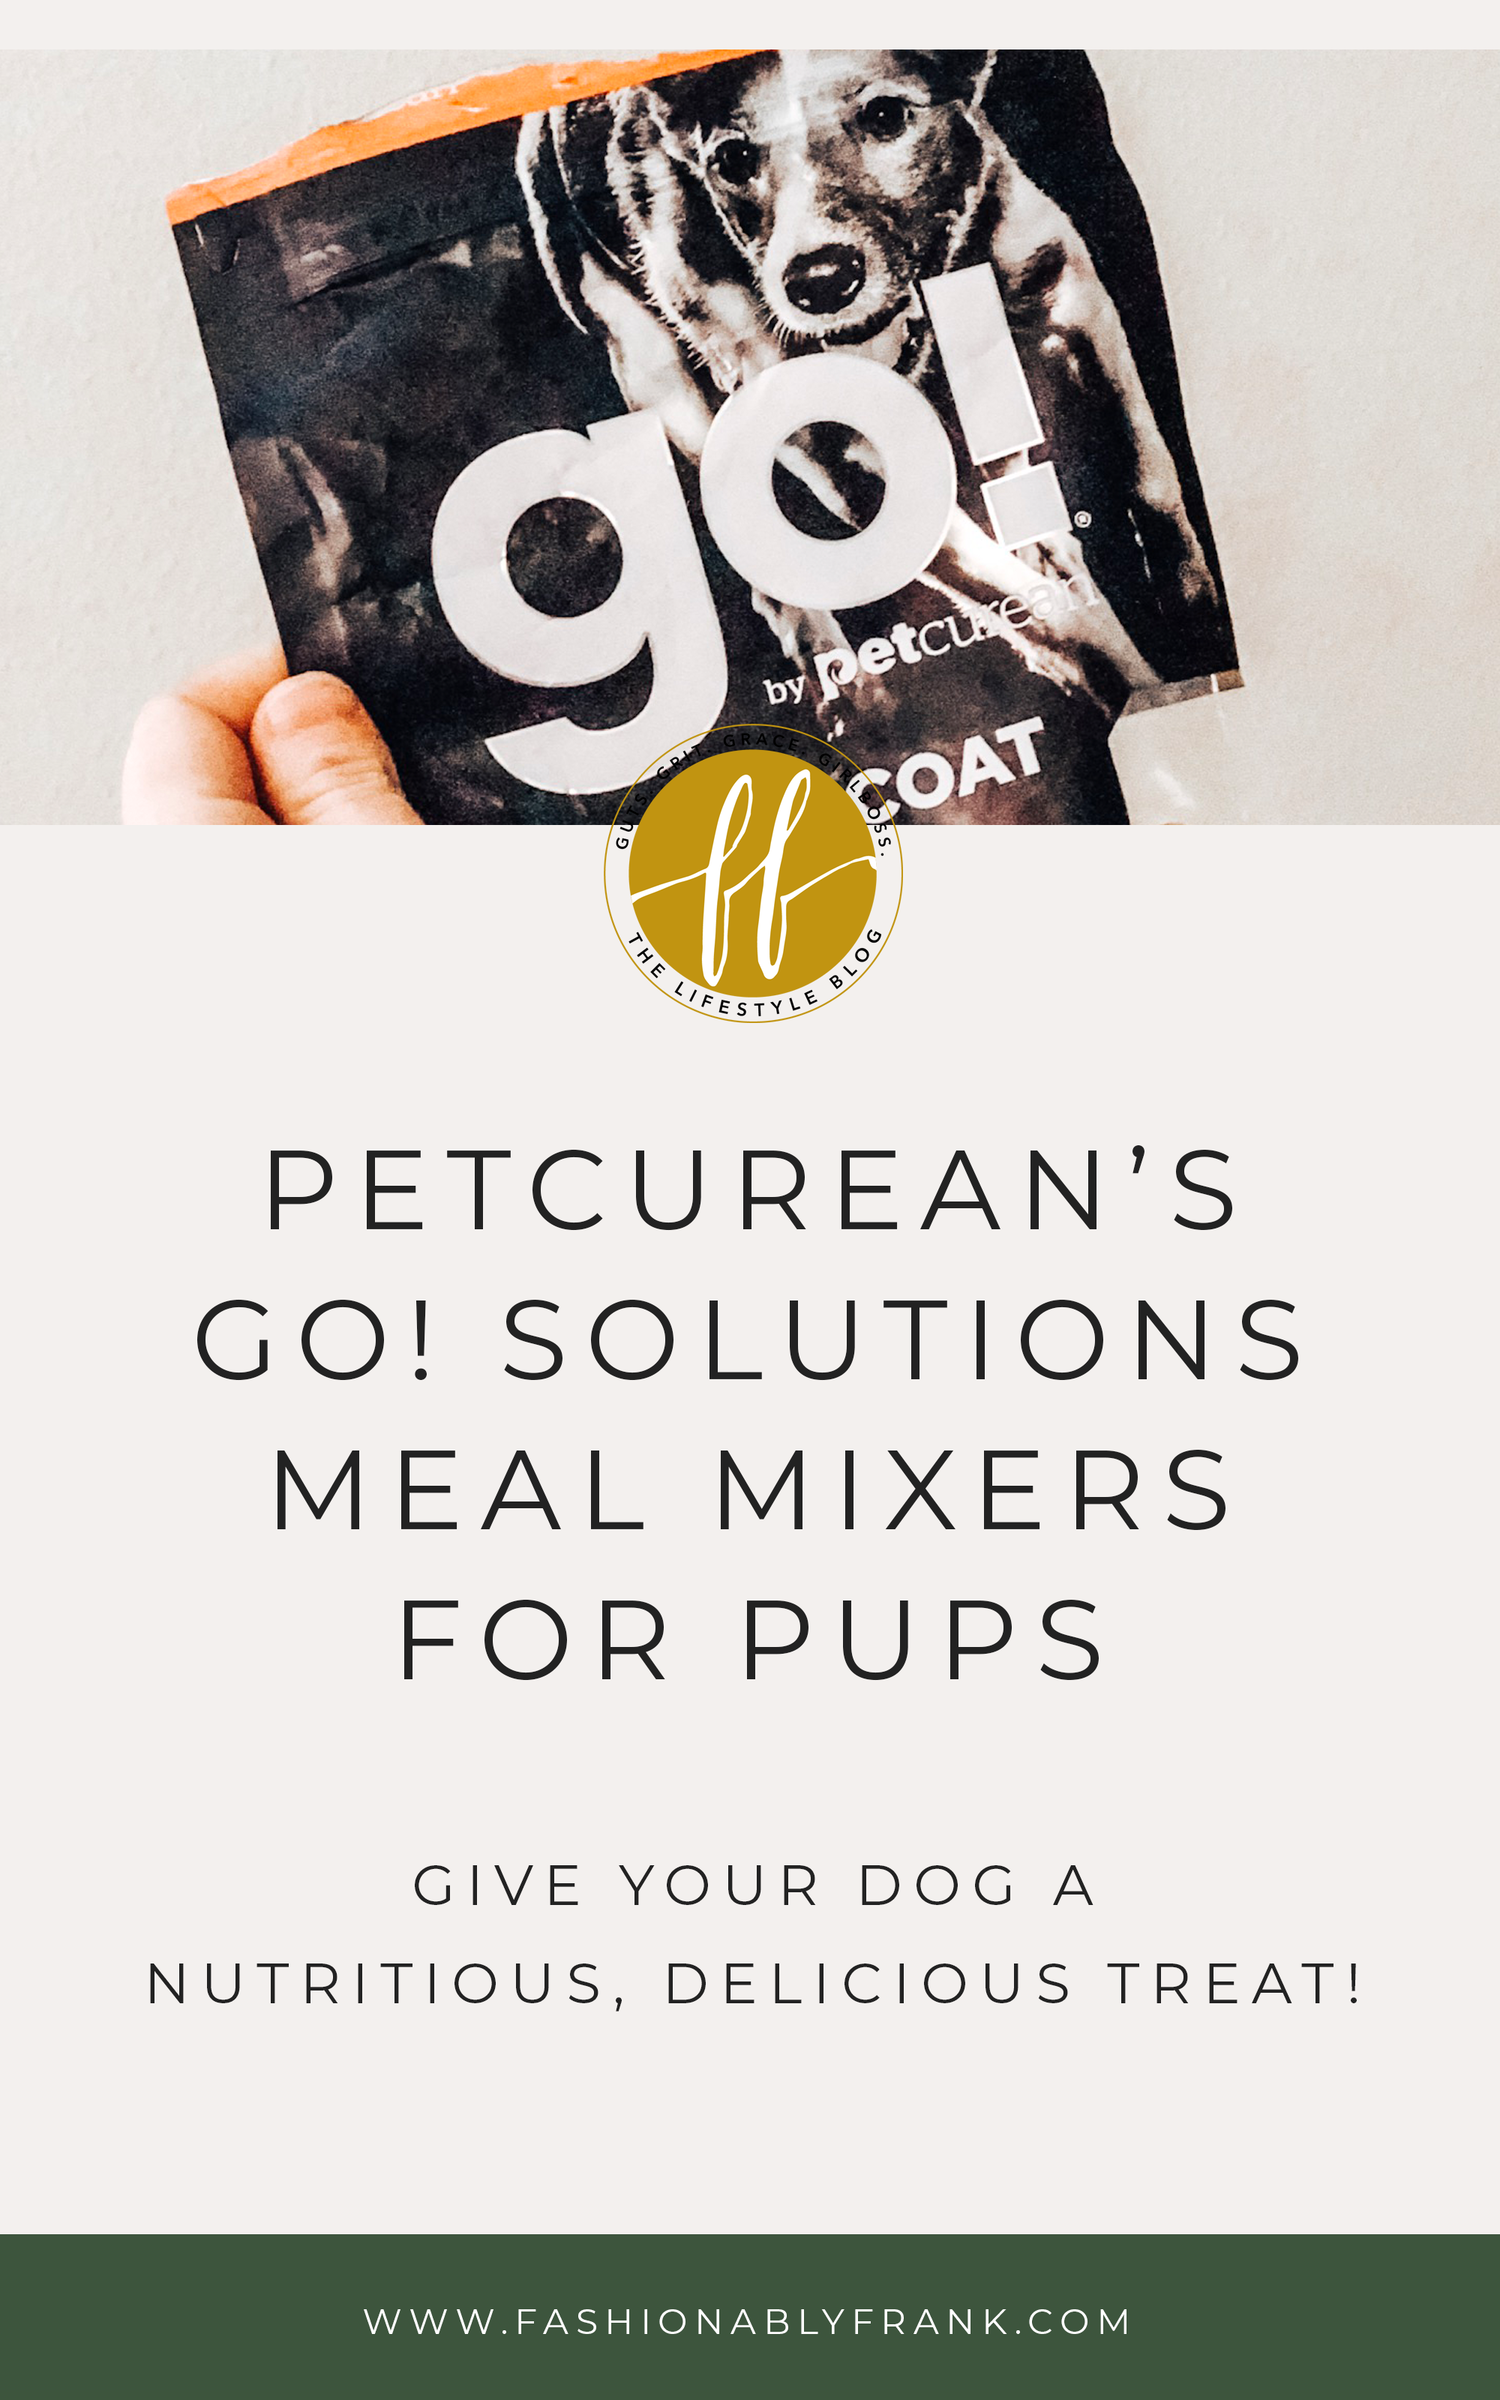 Petcurean Go Solutions Meal Mixers The Nutritional Treat For